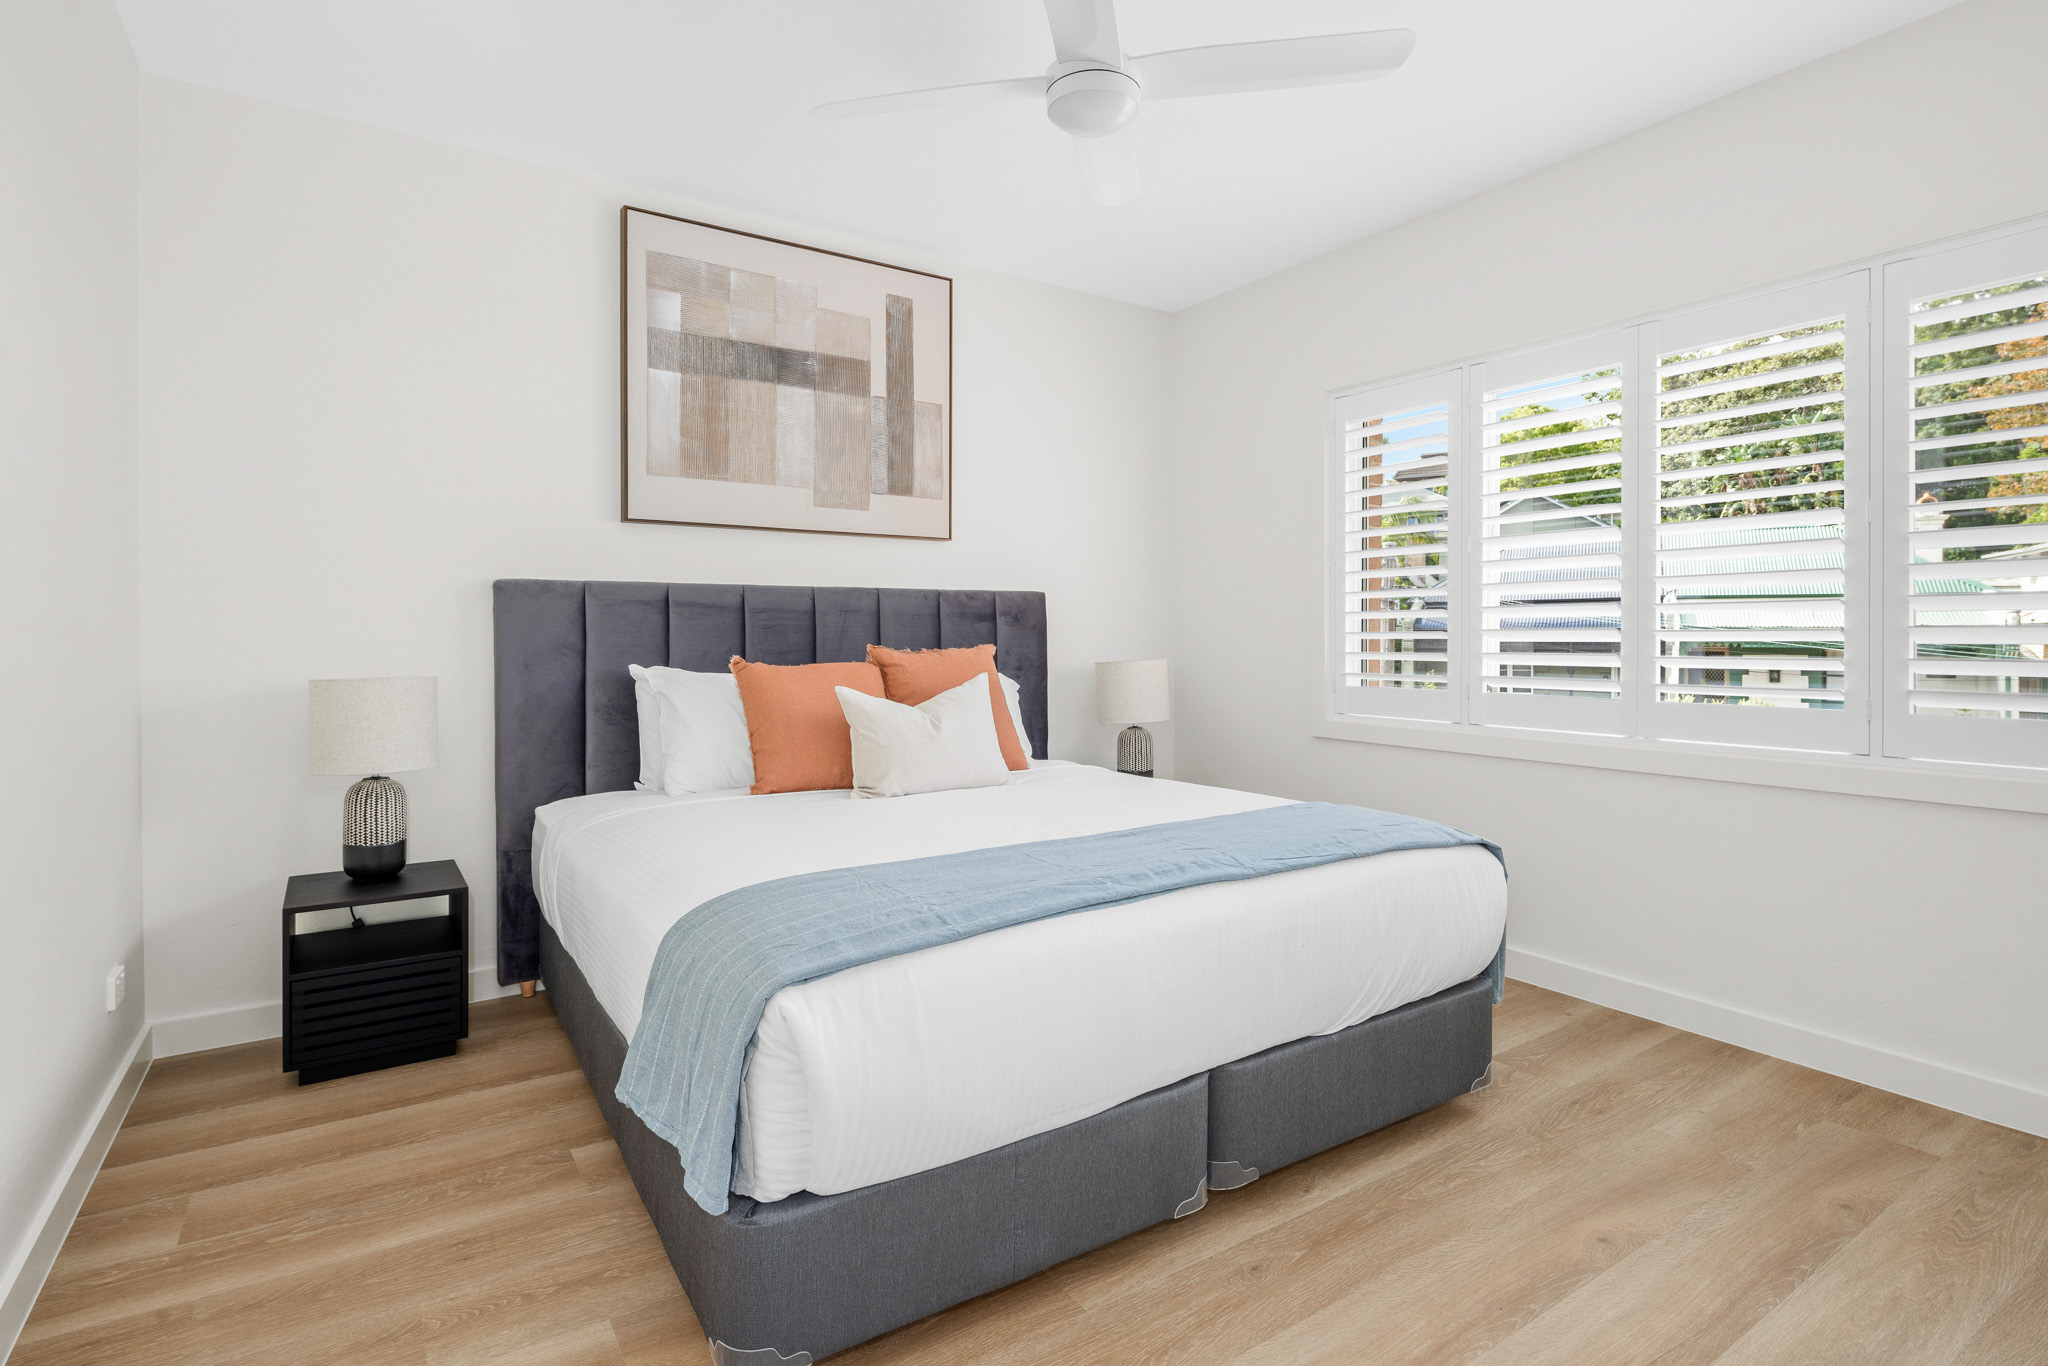 Bedroom - One Bedroom Apartment With Study - Urban Rest - Neutral Bay Apartments - Sydney